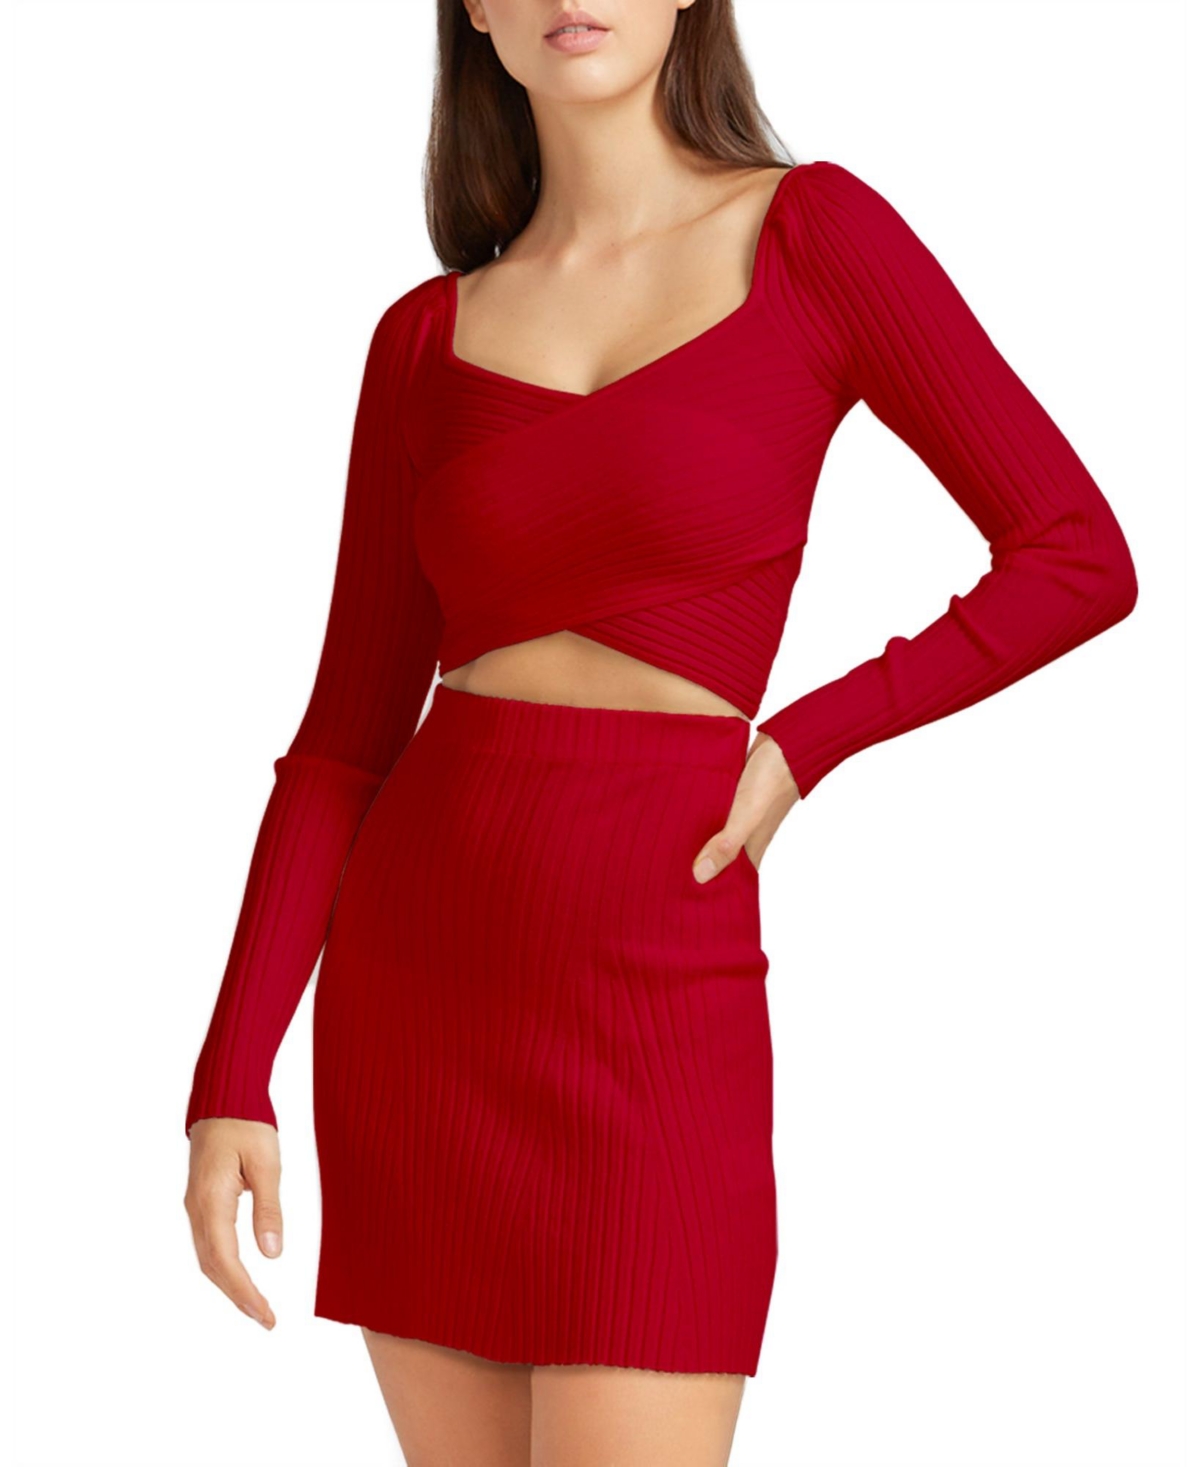 Women Belle & Bloom Forget Me Not Knit Crop Top - Red